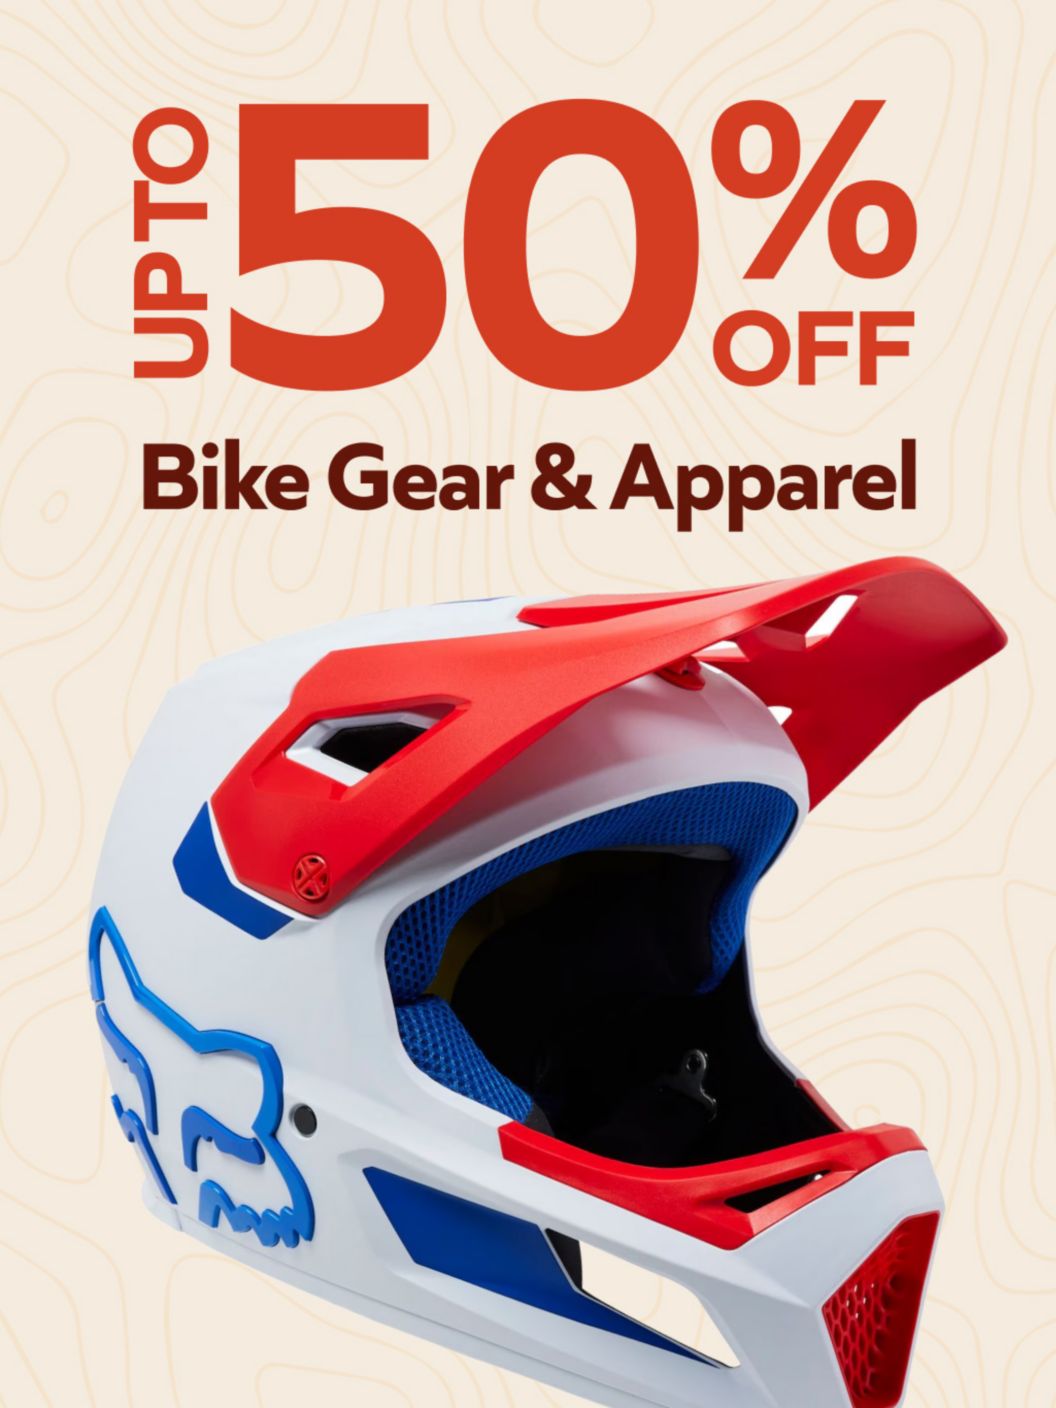 Bike gear and apparel up to 50% off 